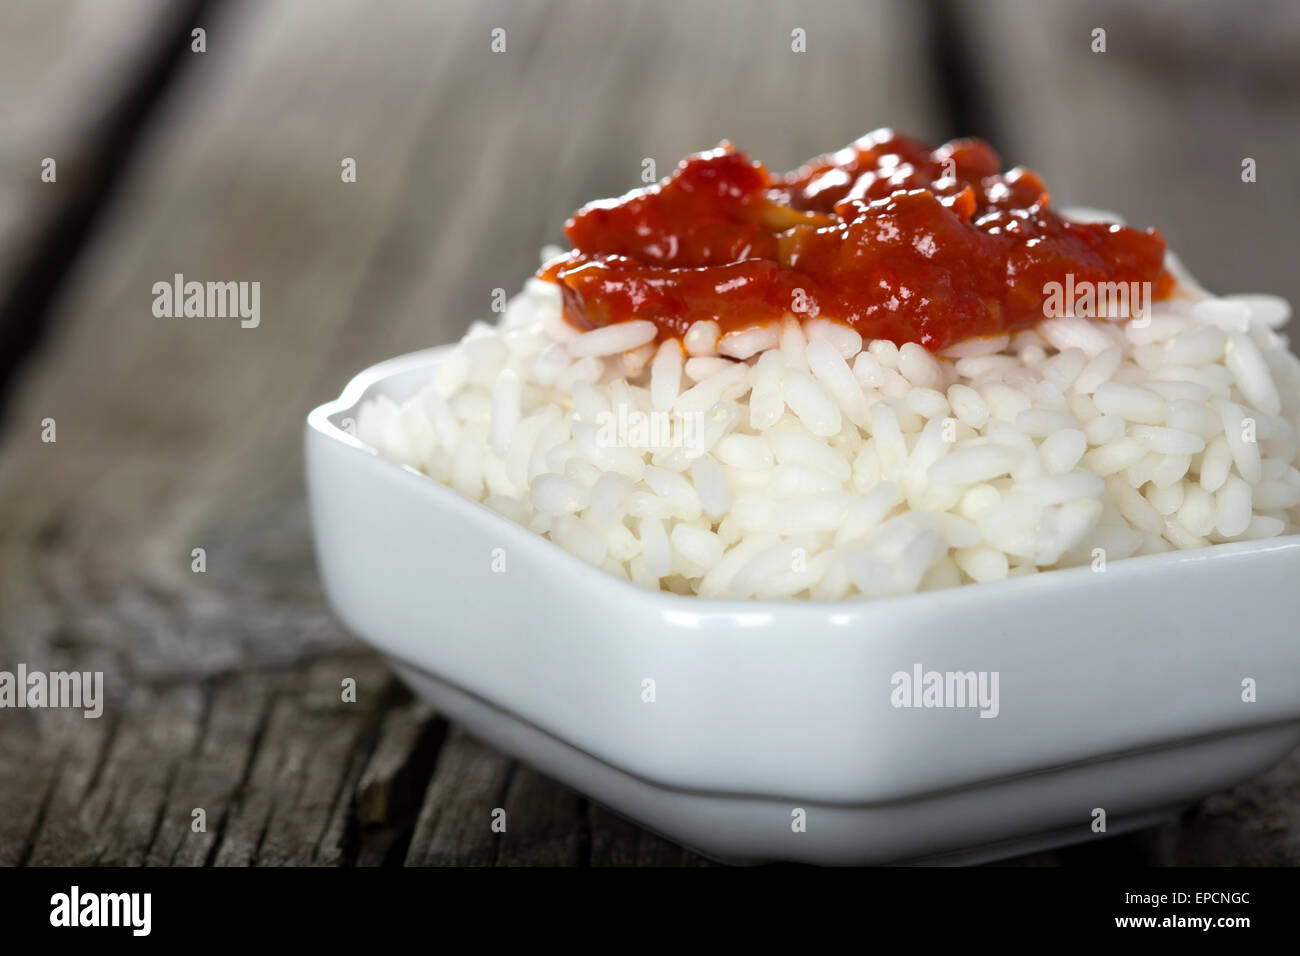 Bowl full of rice and tomato sauce over wooden background Stock Photo